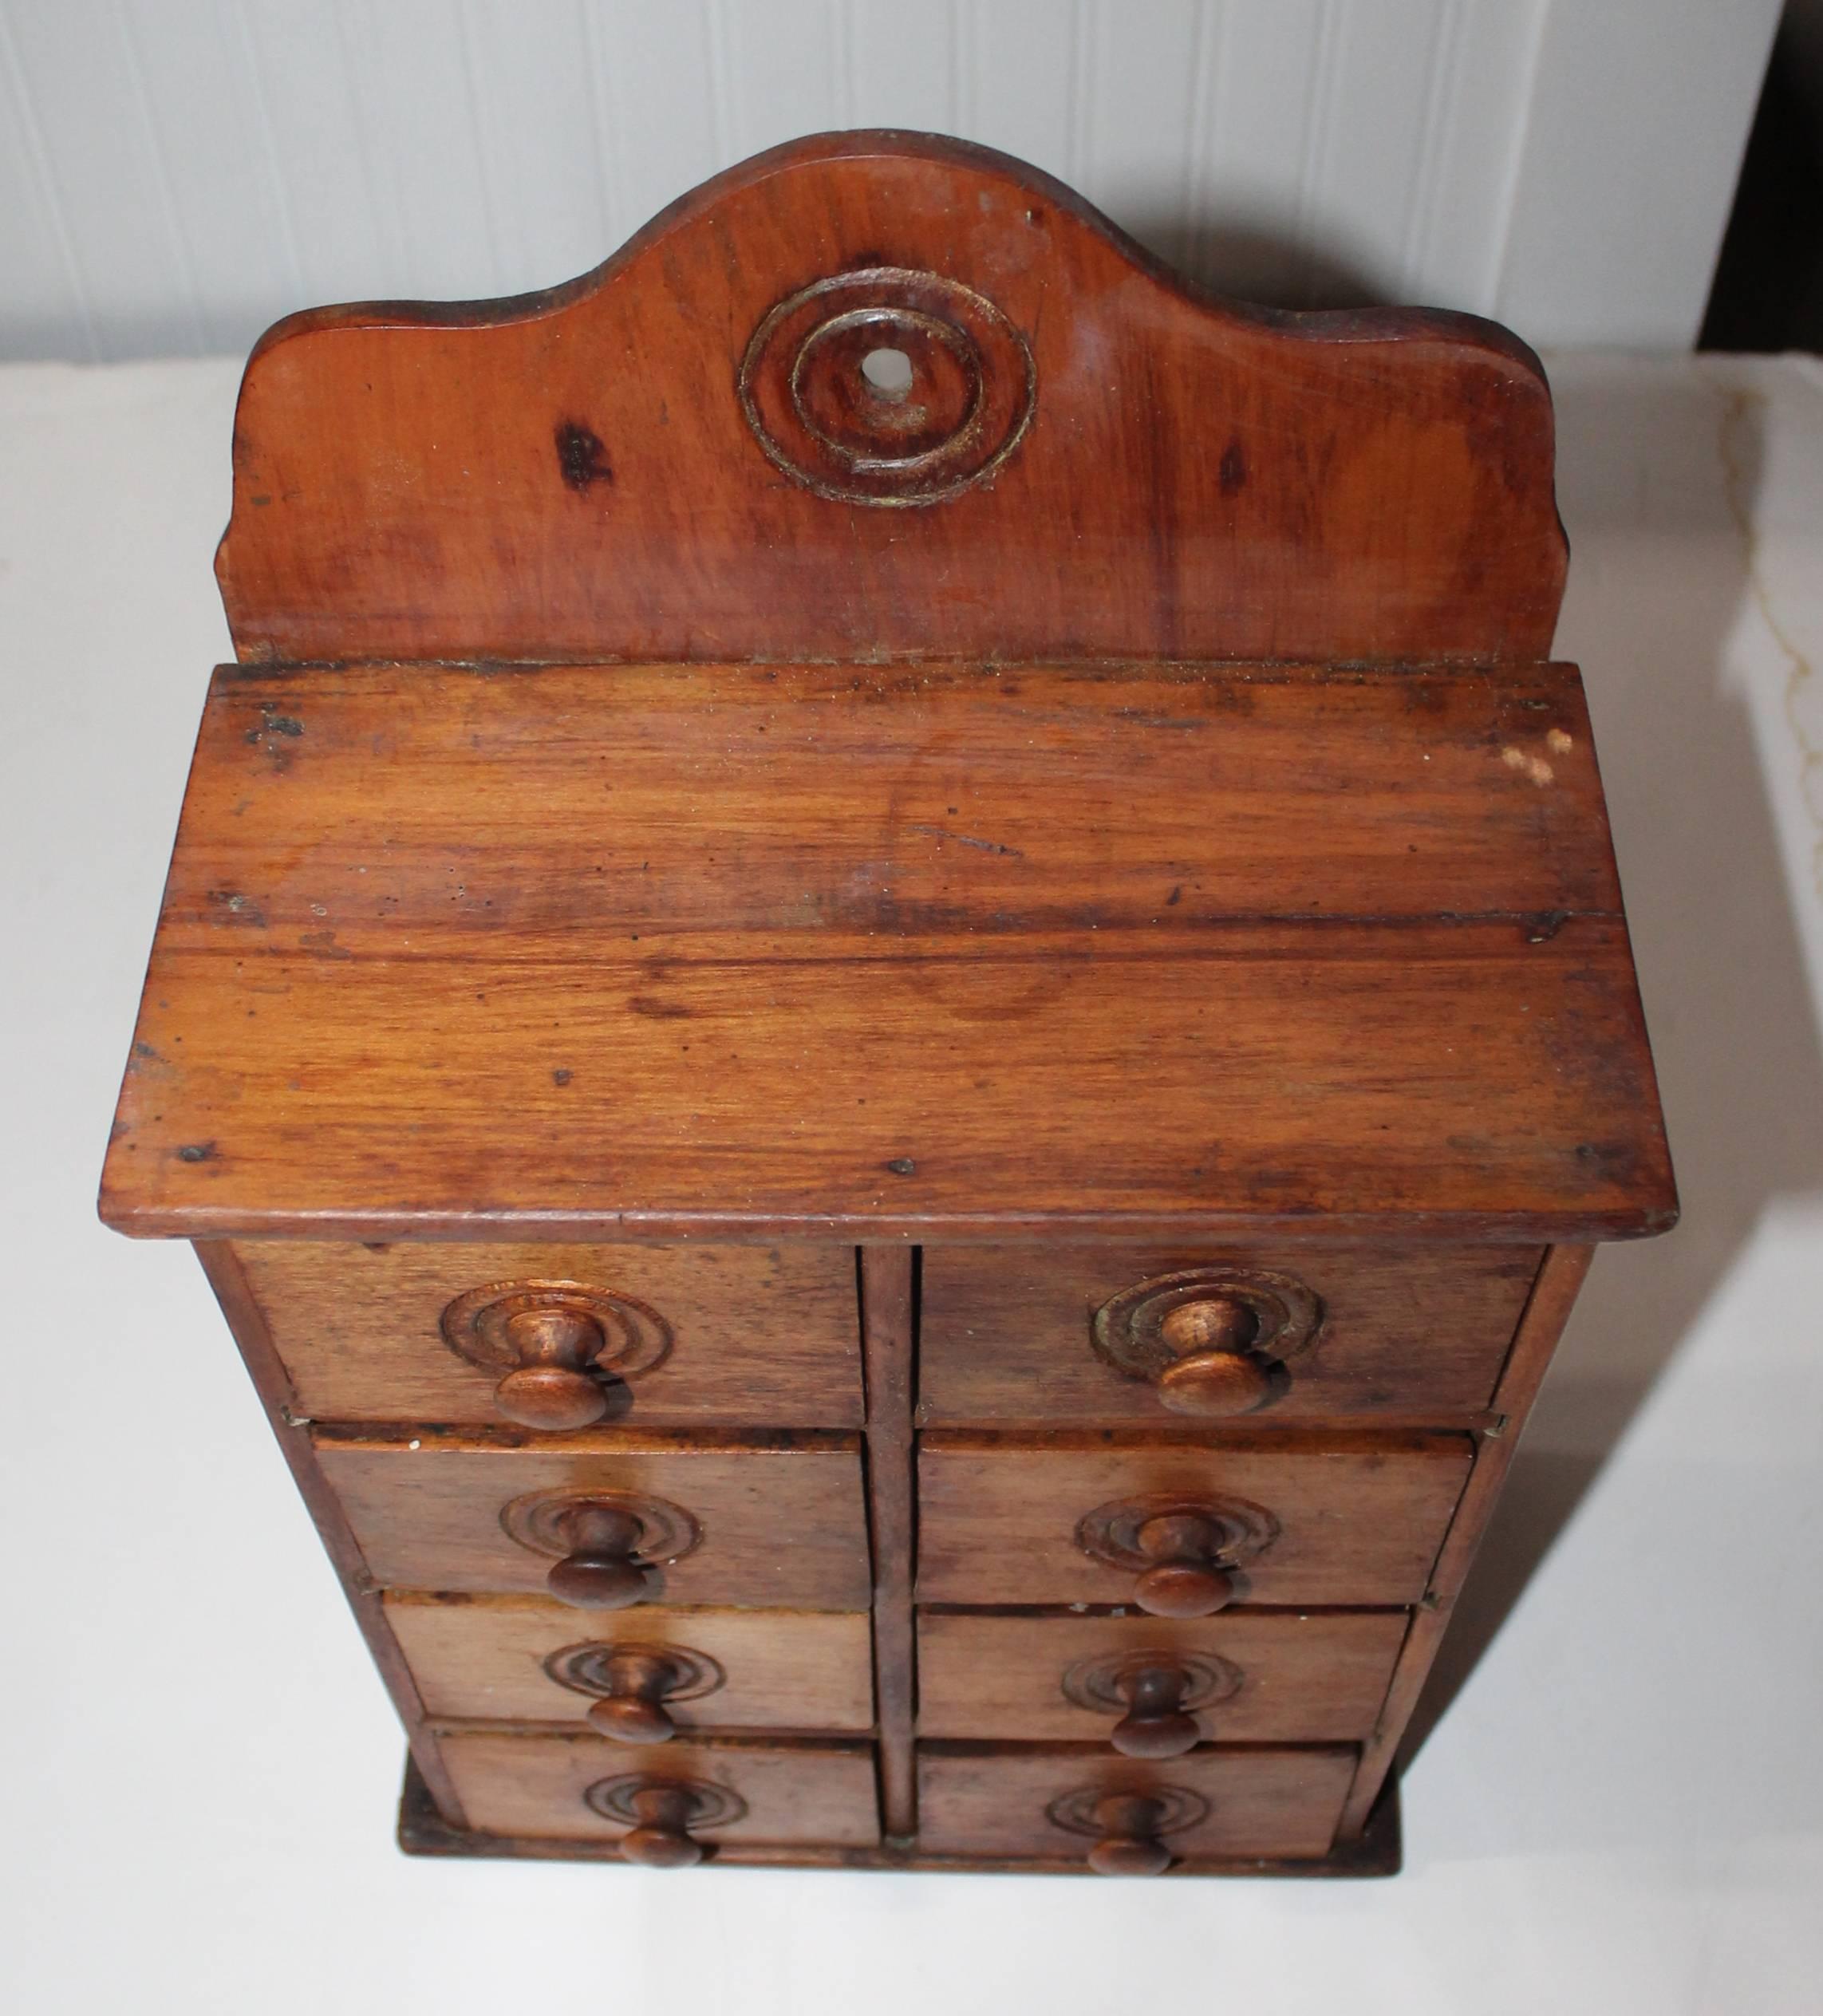 This eight-drawer 19th century spice cabinet is in amazing condition. Original knobs original old surface. This Item has minor wear consistent with age and use.